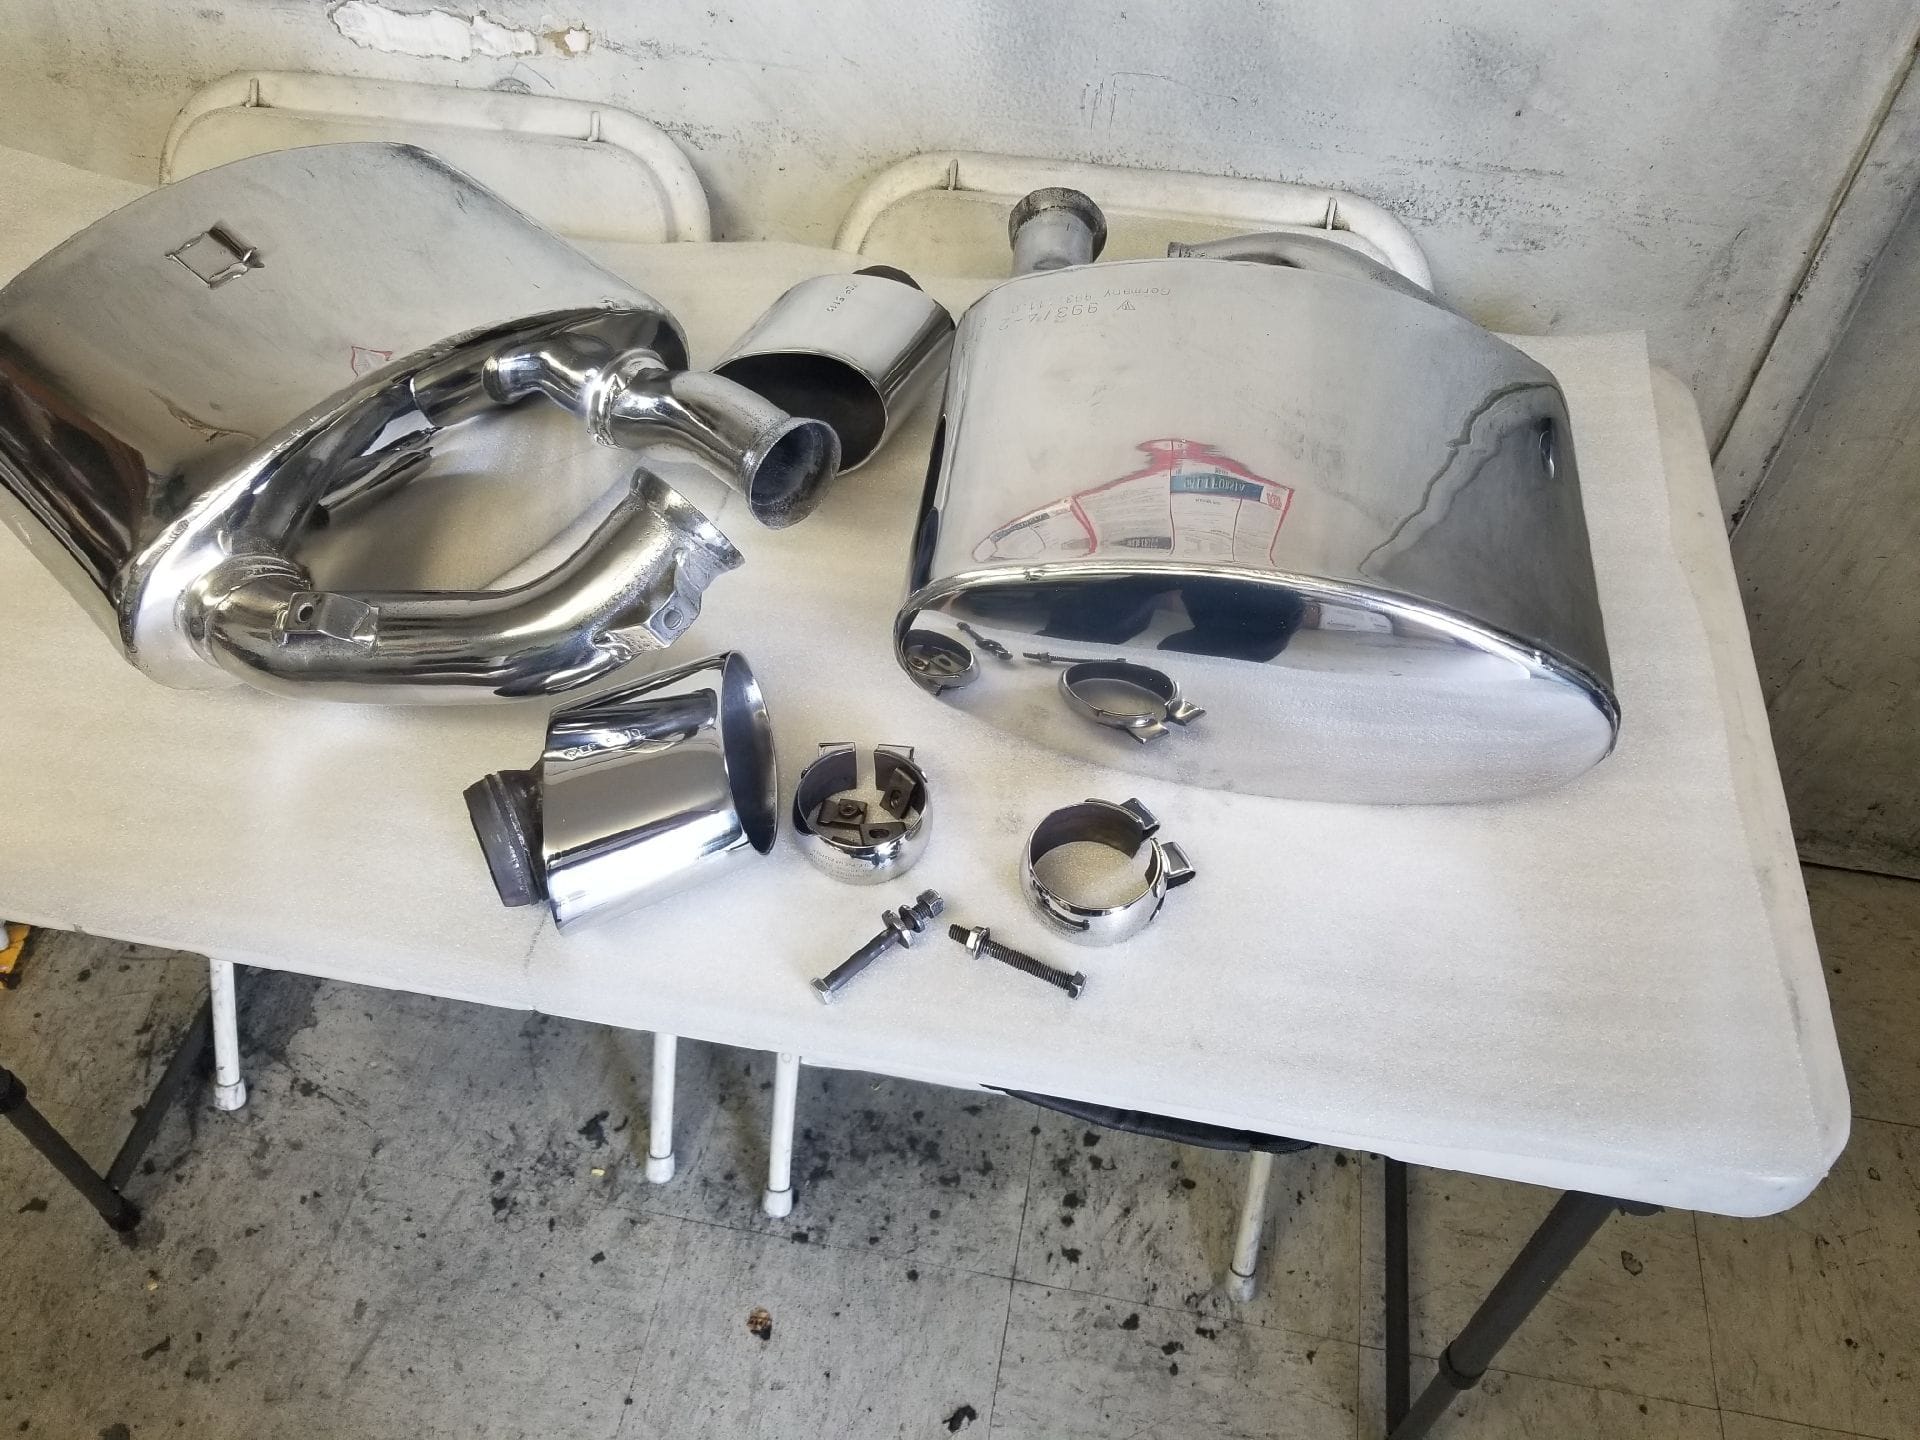 Engine - Exhaust - Set of Fister III 993 mufflers - Used - 1995 to 1998 Porsche 911 - West Linn, OR 97068, United States